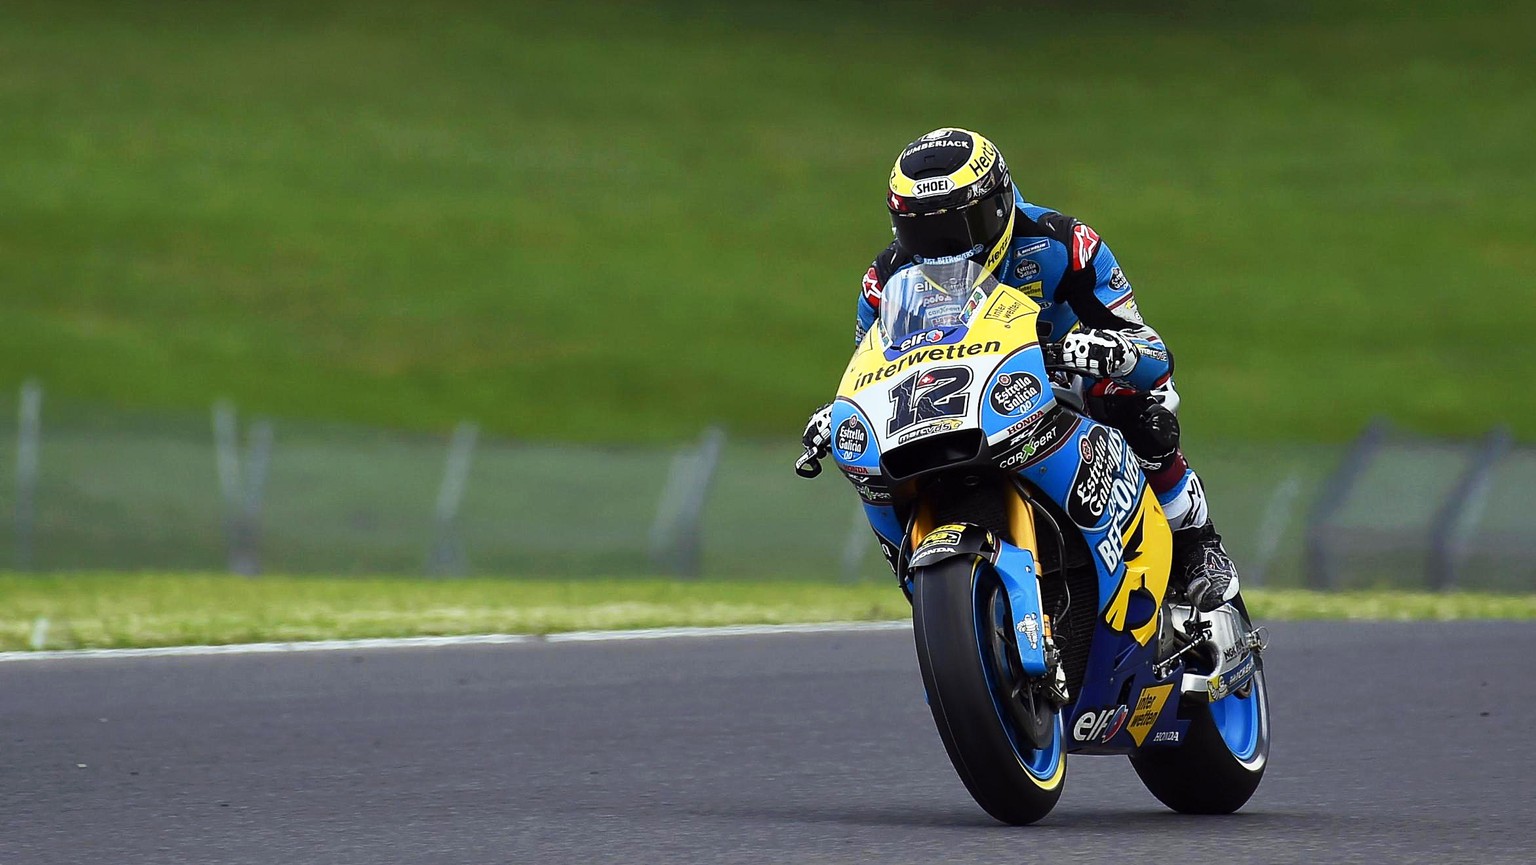 epa06778429 Swiss MotoGP rider Thomas Luethi of the EG 0,0 Marc VDS team in action during the free practice session at the Mugello circuit in Scarperia, central Italy, 01 June 2018. The Motorcycling G ...